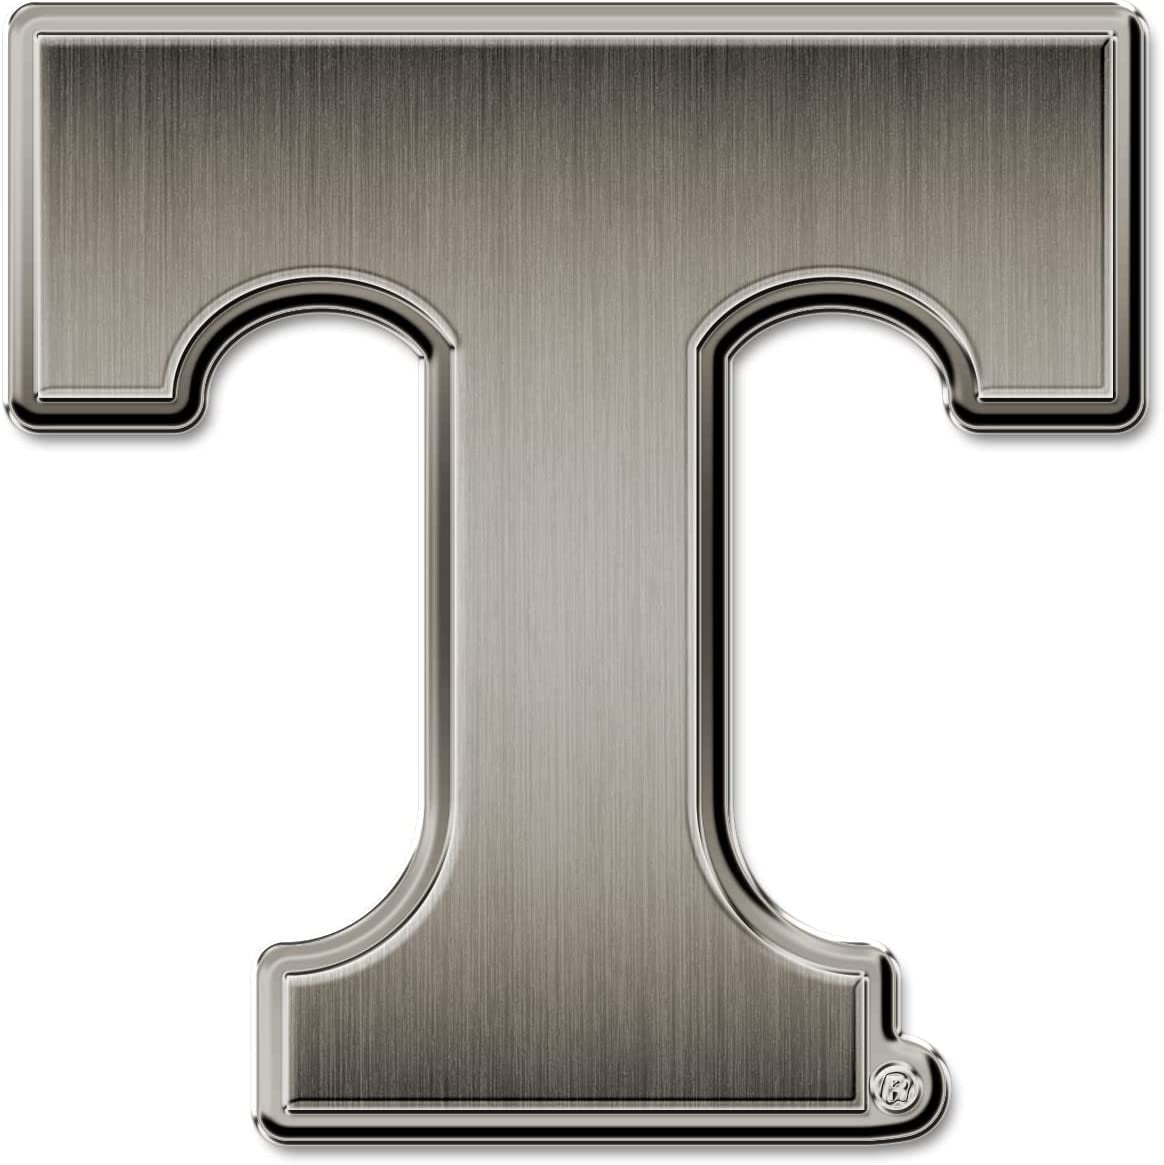 University of Tennessee Volunteers Solid Metal Auto Emblem Antique Nickel for Car/Truck/SUV